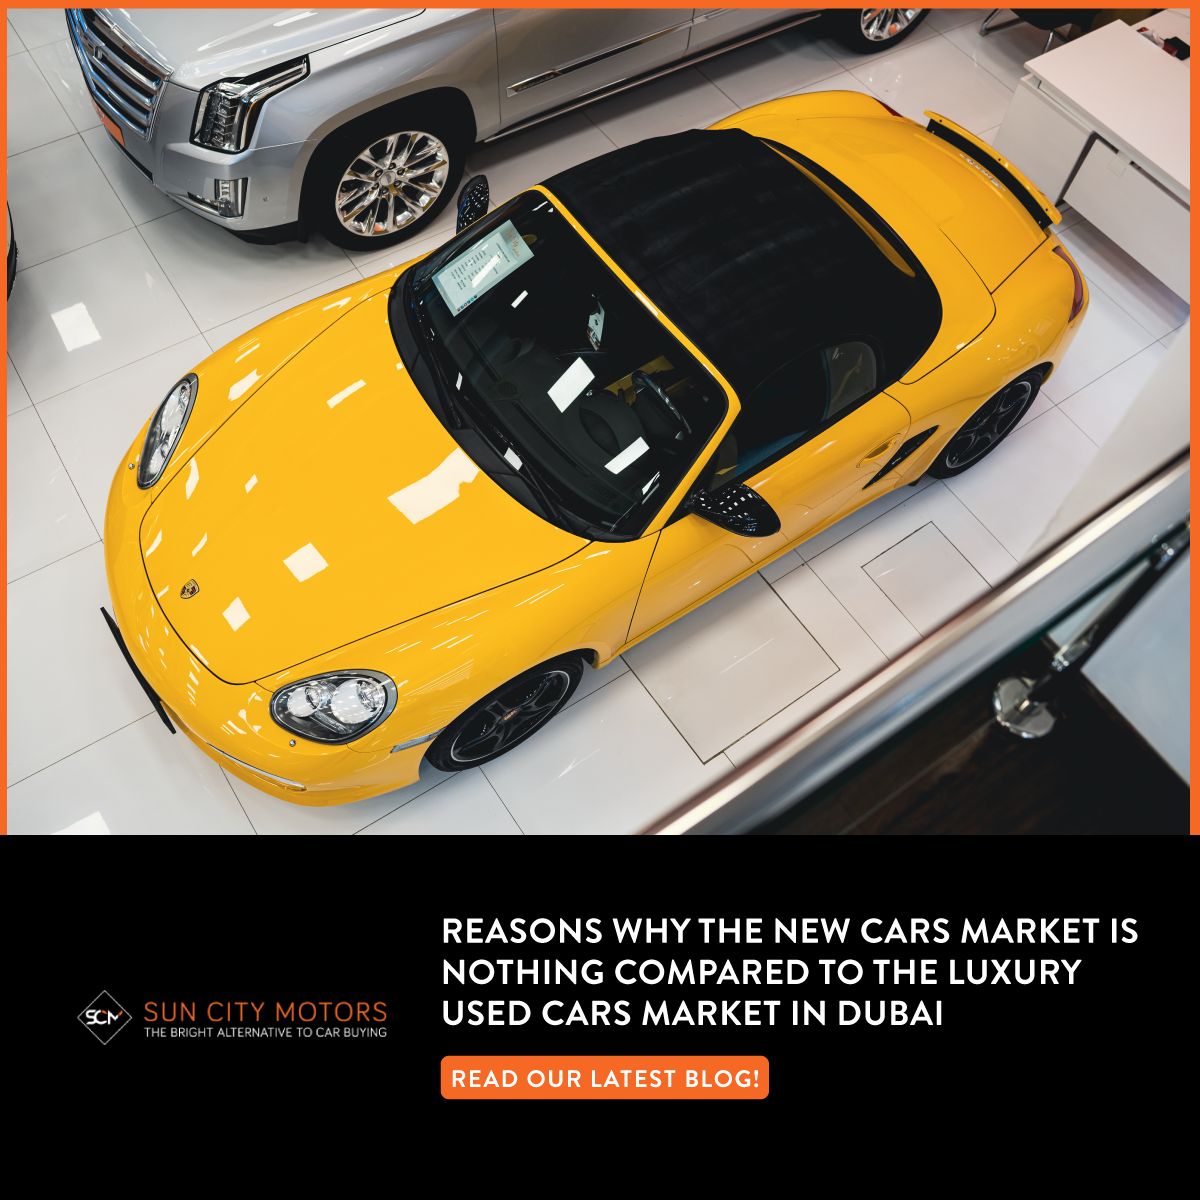 Reasons Why the New Cars Market is Nothing Compared to the Used Luxury Cars Market in Dubai